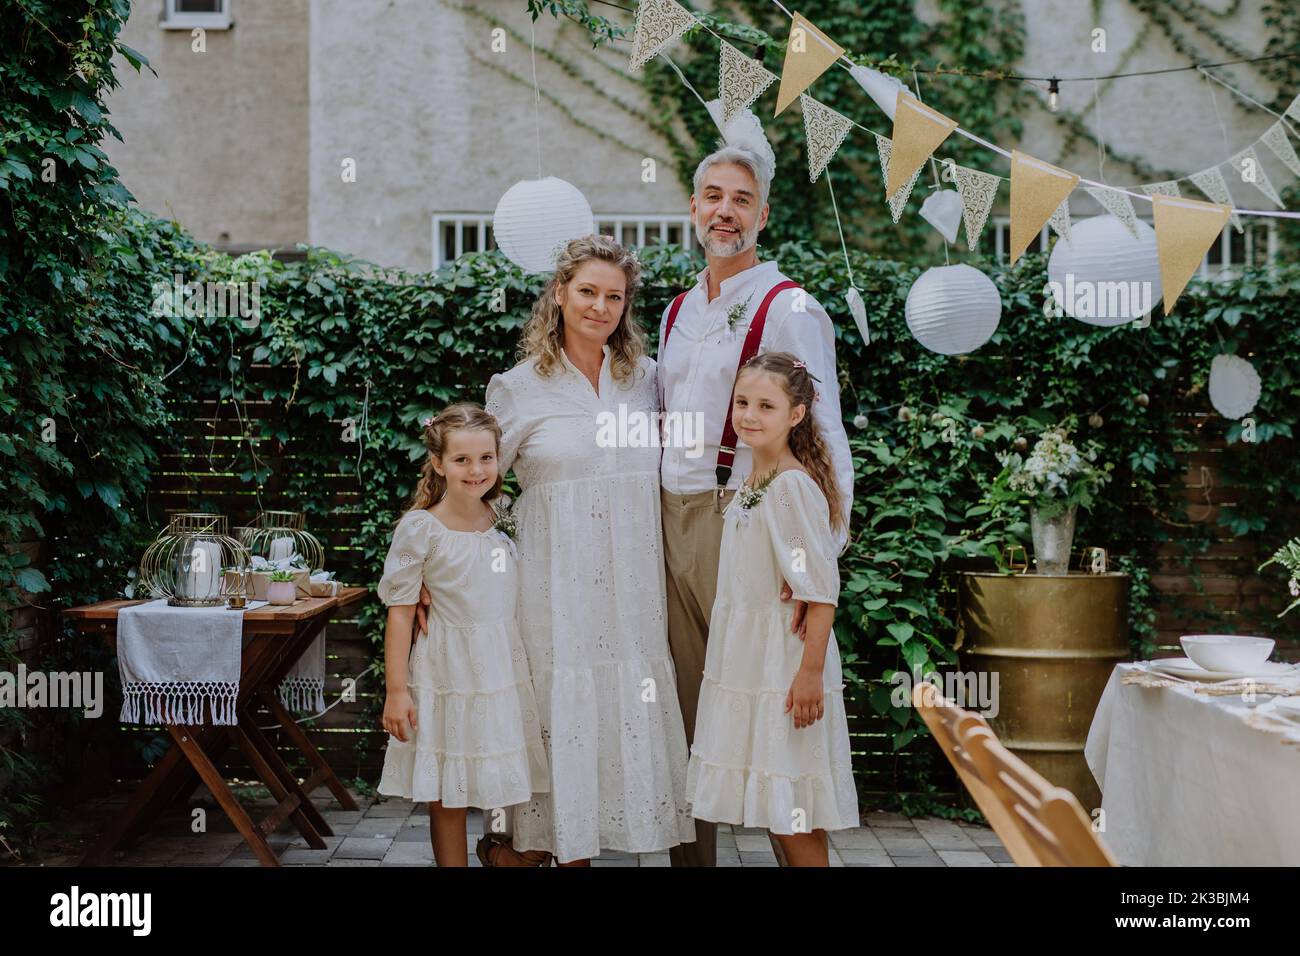 Mature bride and groom posing with their daughters at wedding reception outside in the backyard. Stock Photo